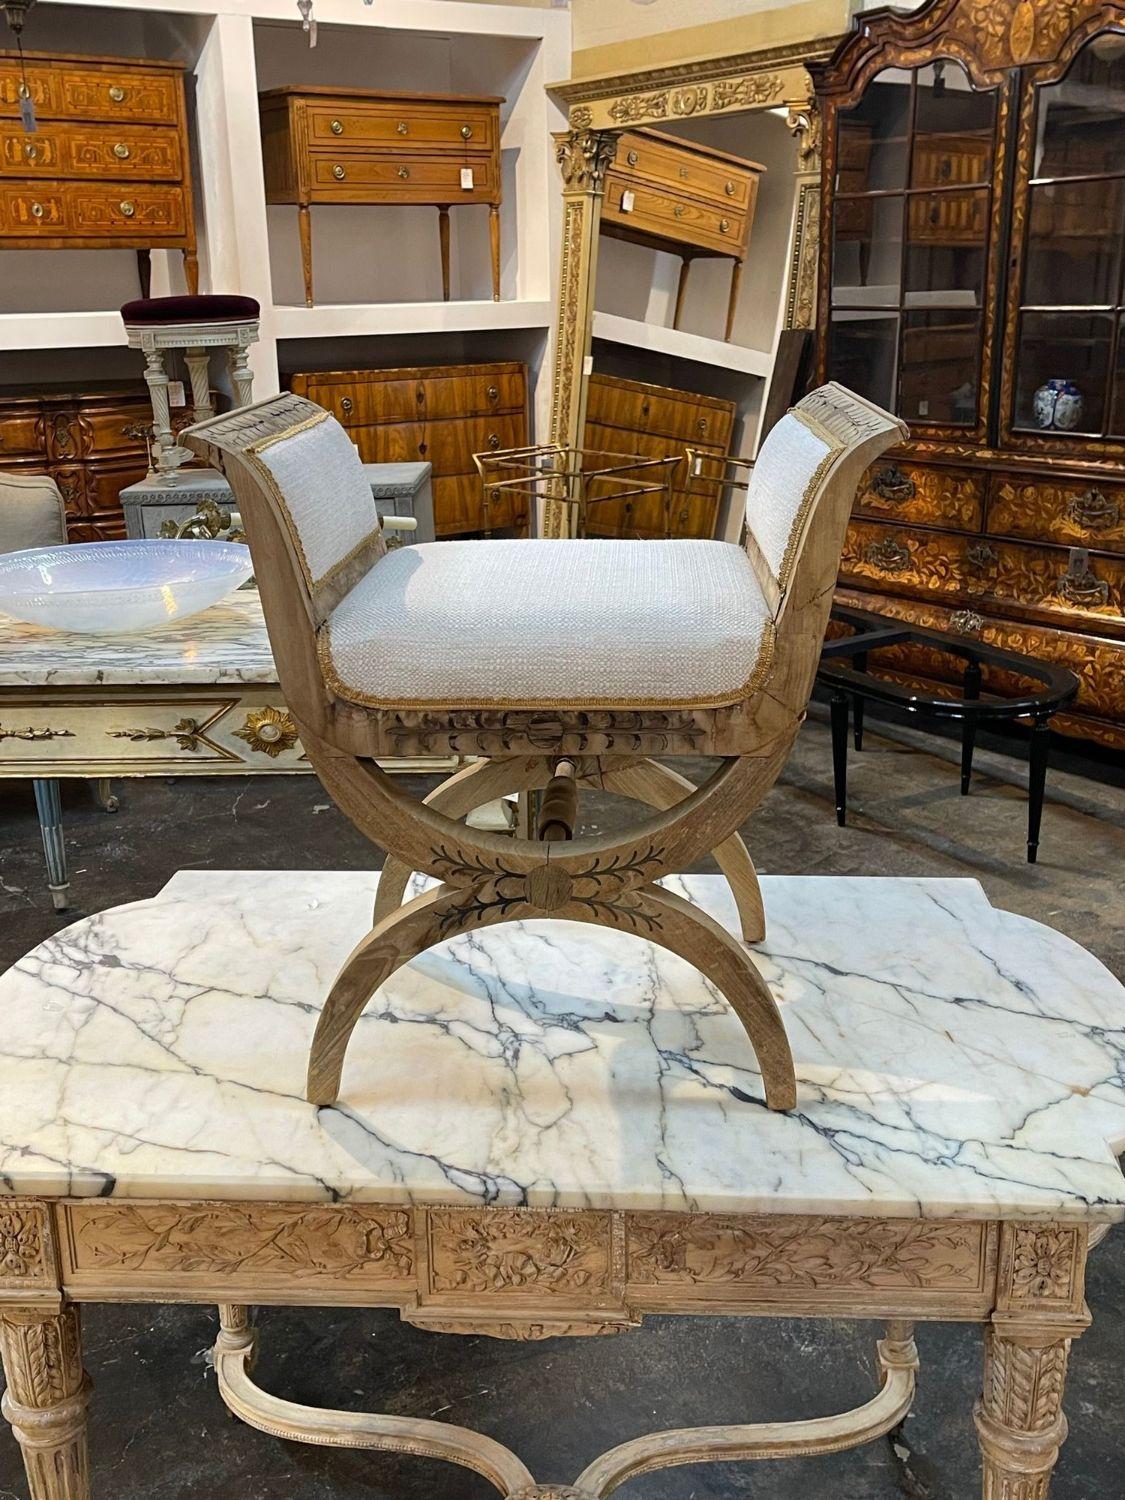 Elegant 19th century Italian Neo-Classical style x form carved and bleached bench. Upholstered in a beautiful neutral creme fabric. Exceptional quality. So pretty!!